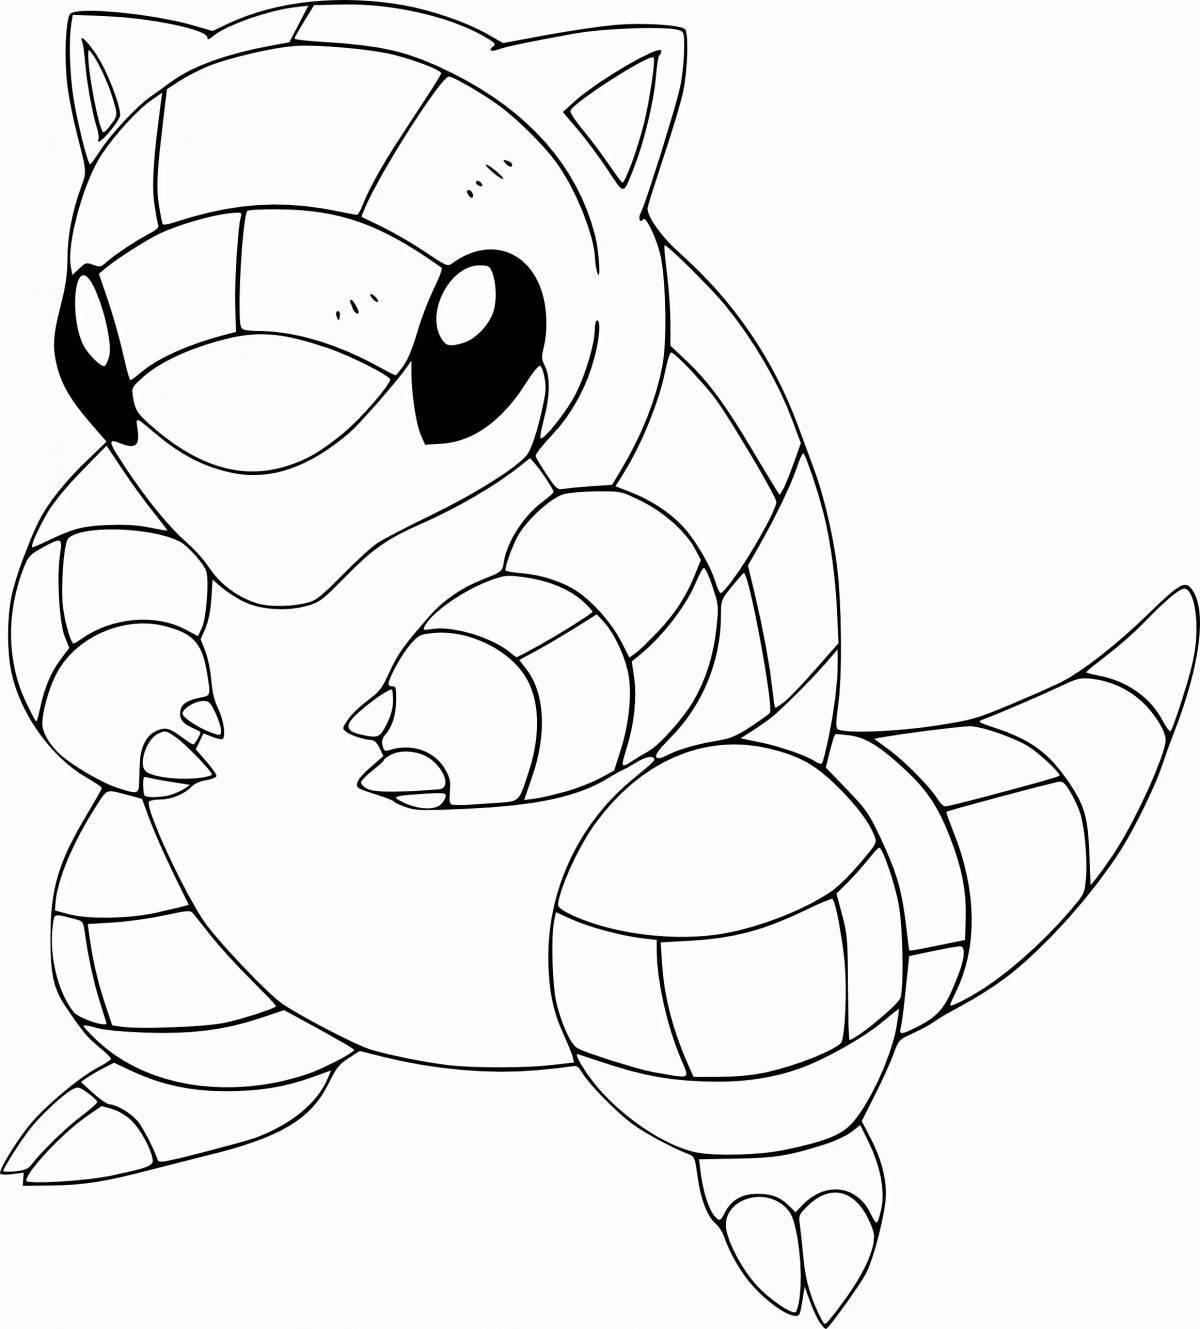 Colouring funny squirtle pokemon